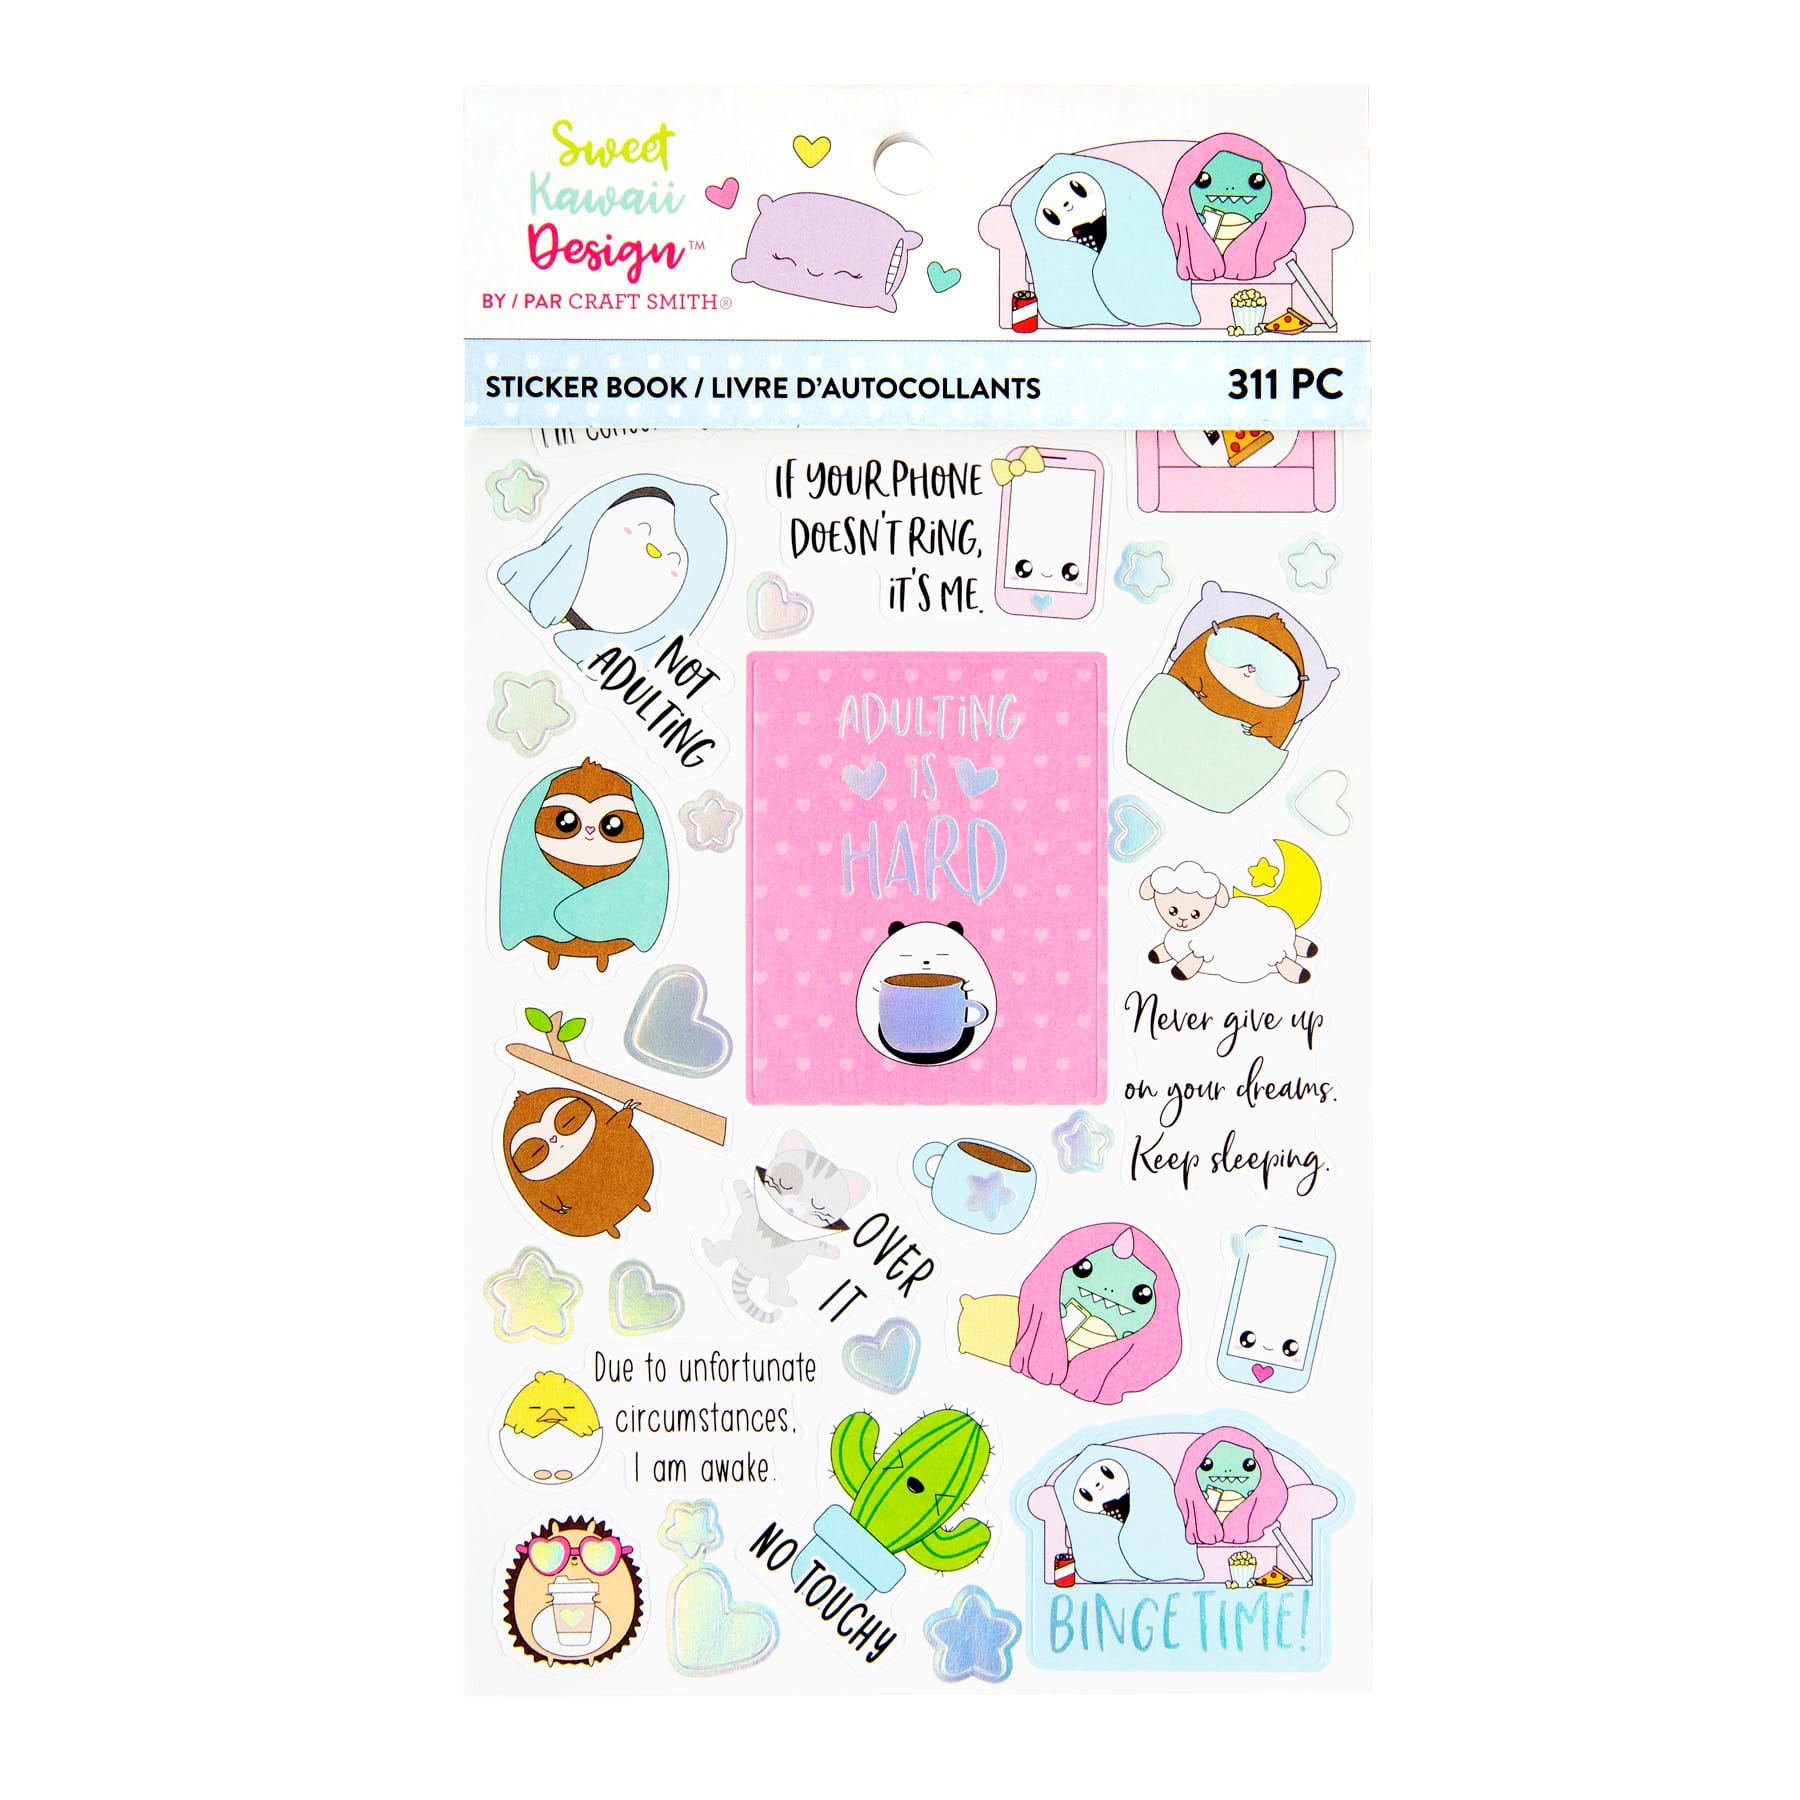 Shop for the Craft Smith™ Sweet Kawaii Design™ Sticker Book, Adulting at Michaels